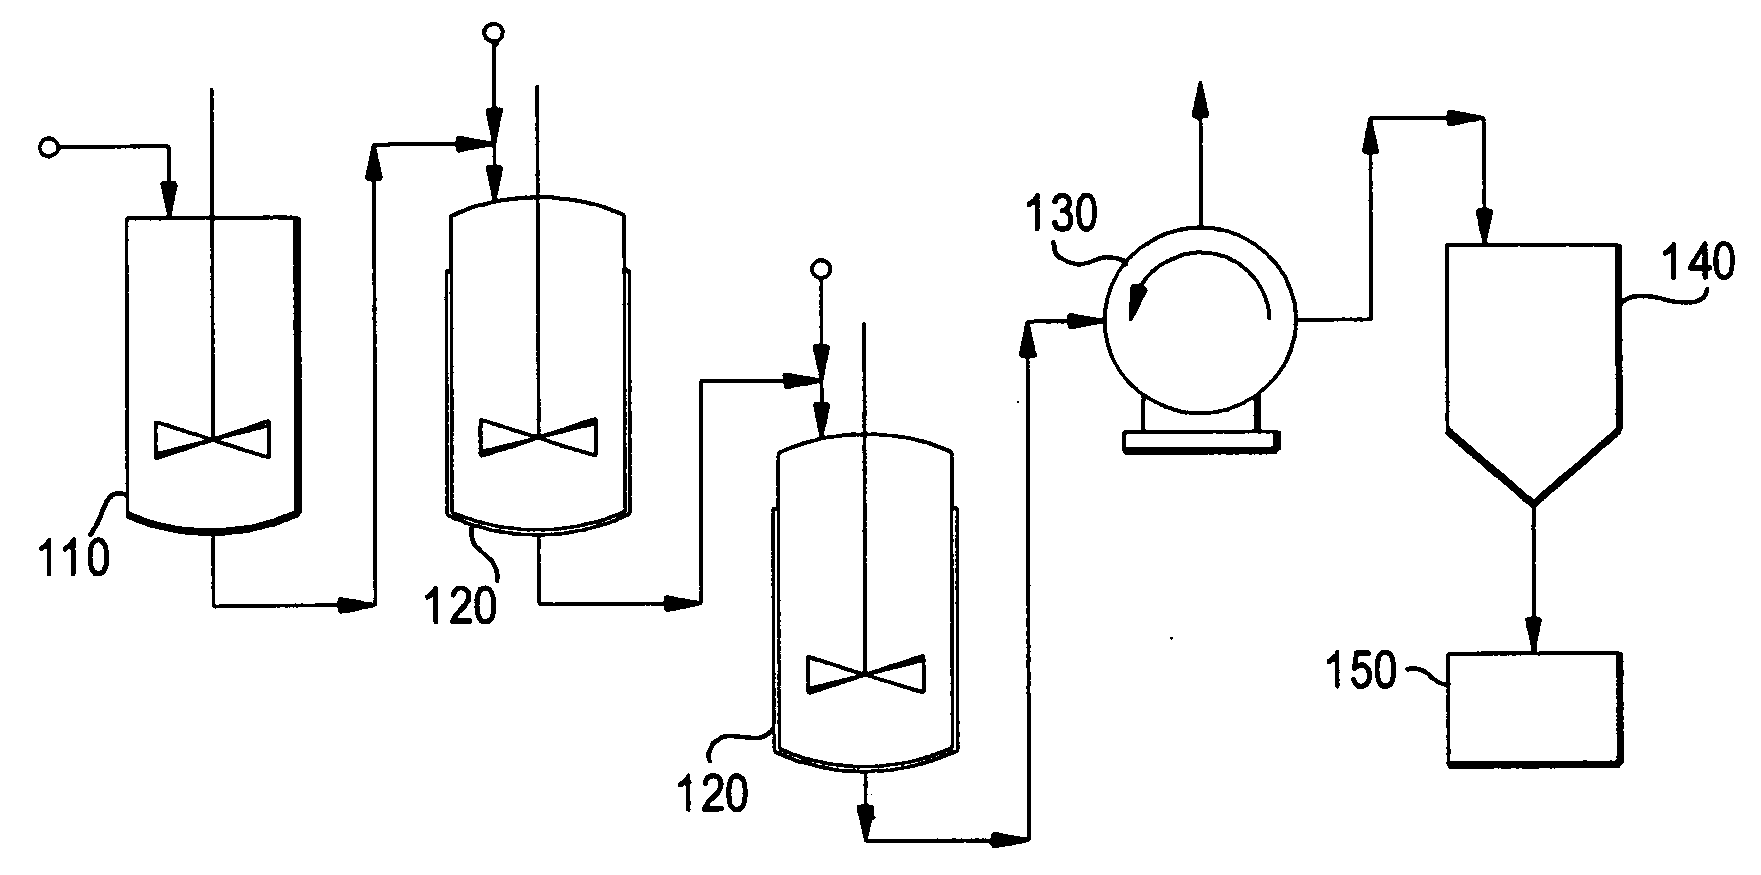 Mixing Vessel and Method of Use